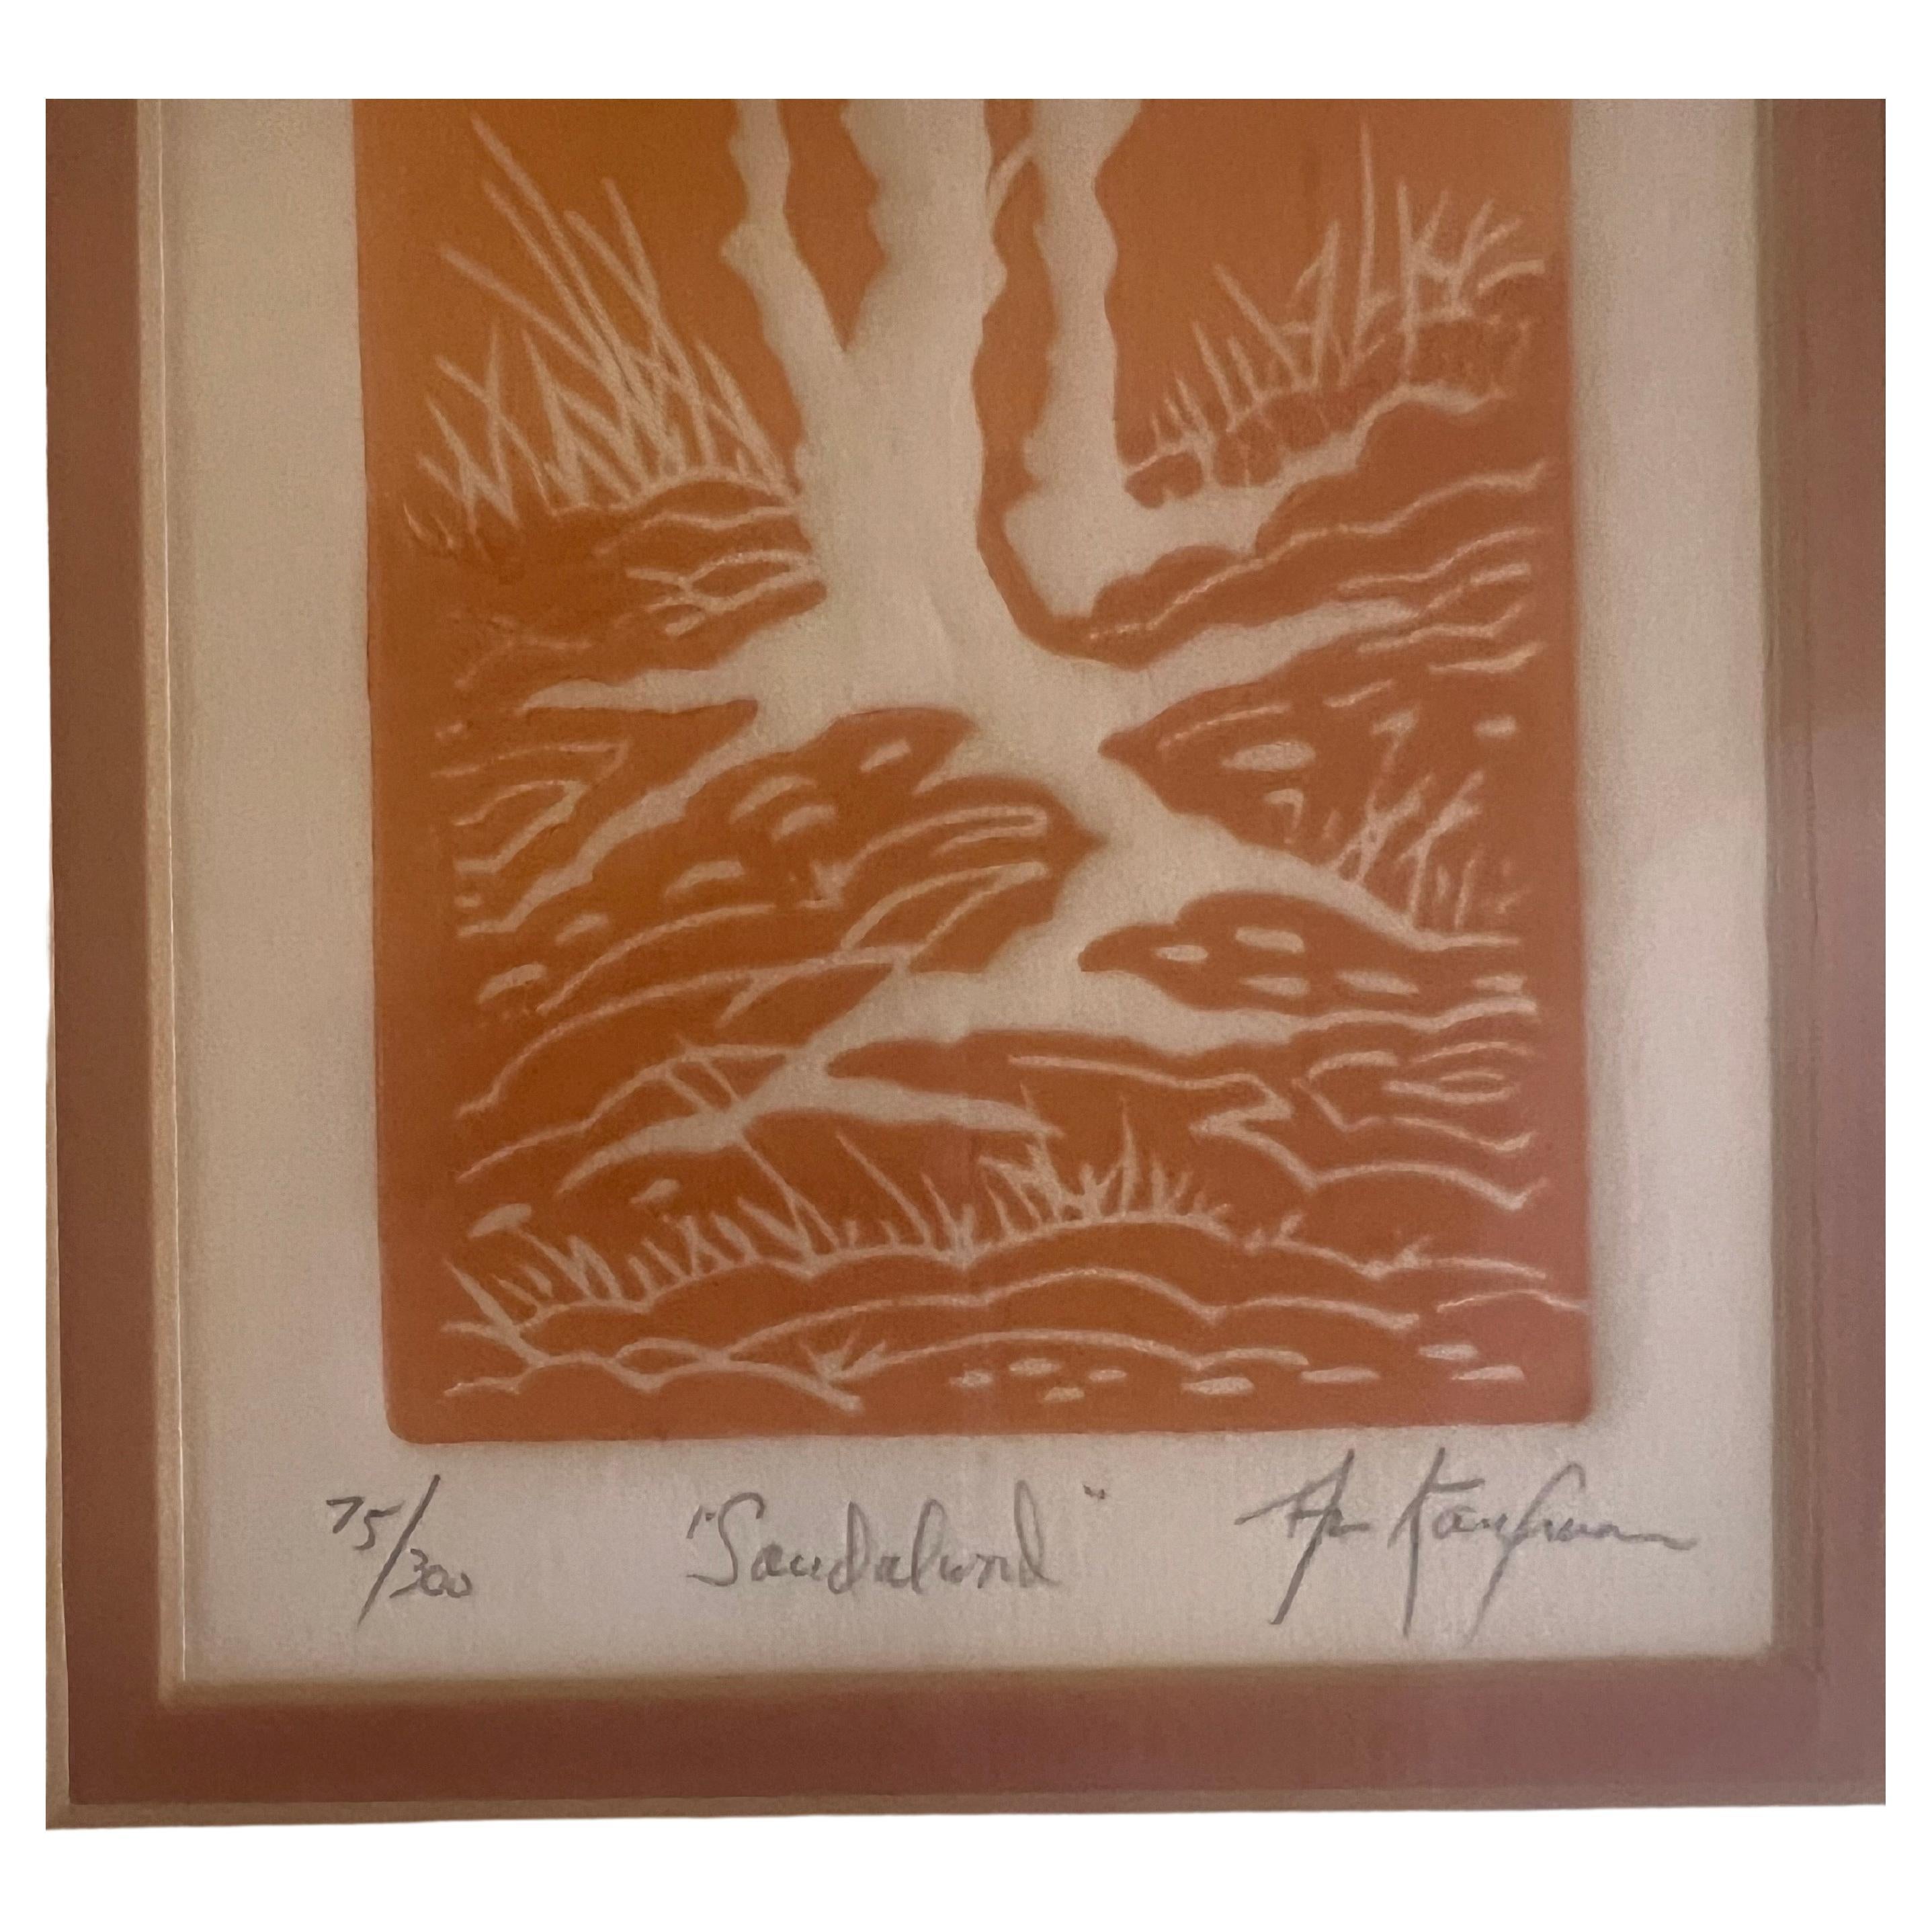 Original 1970's etching by Listed artist Al Kaufman , framed in glass and oak with COA  signed an numbered Sandalwood title.